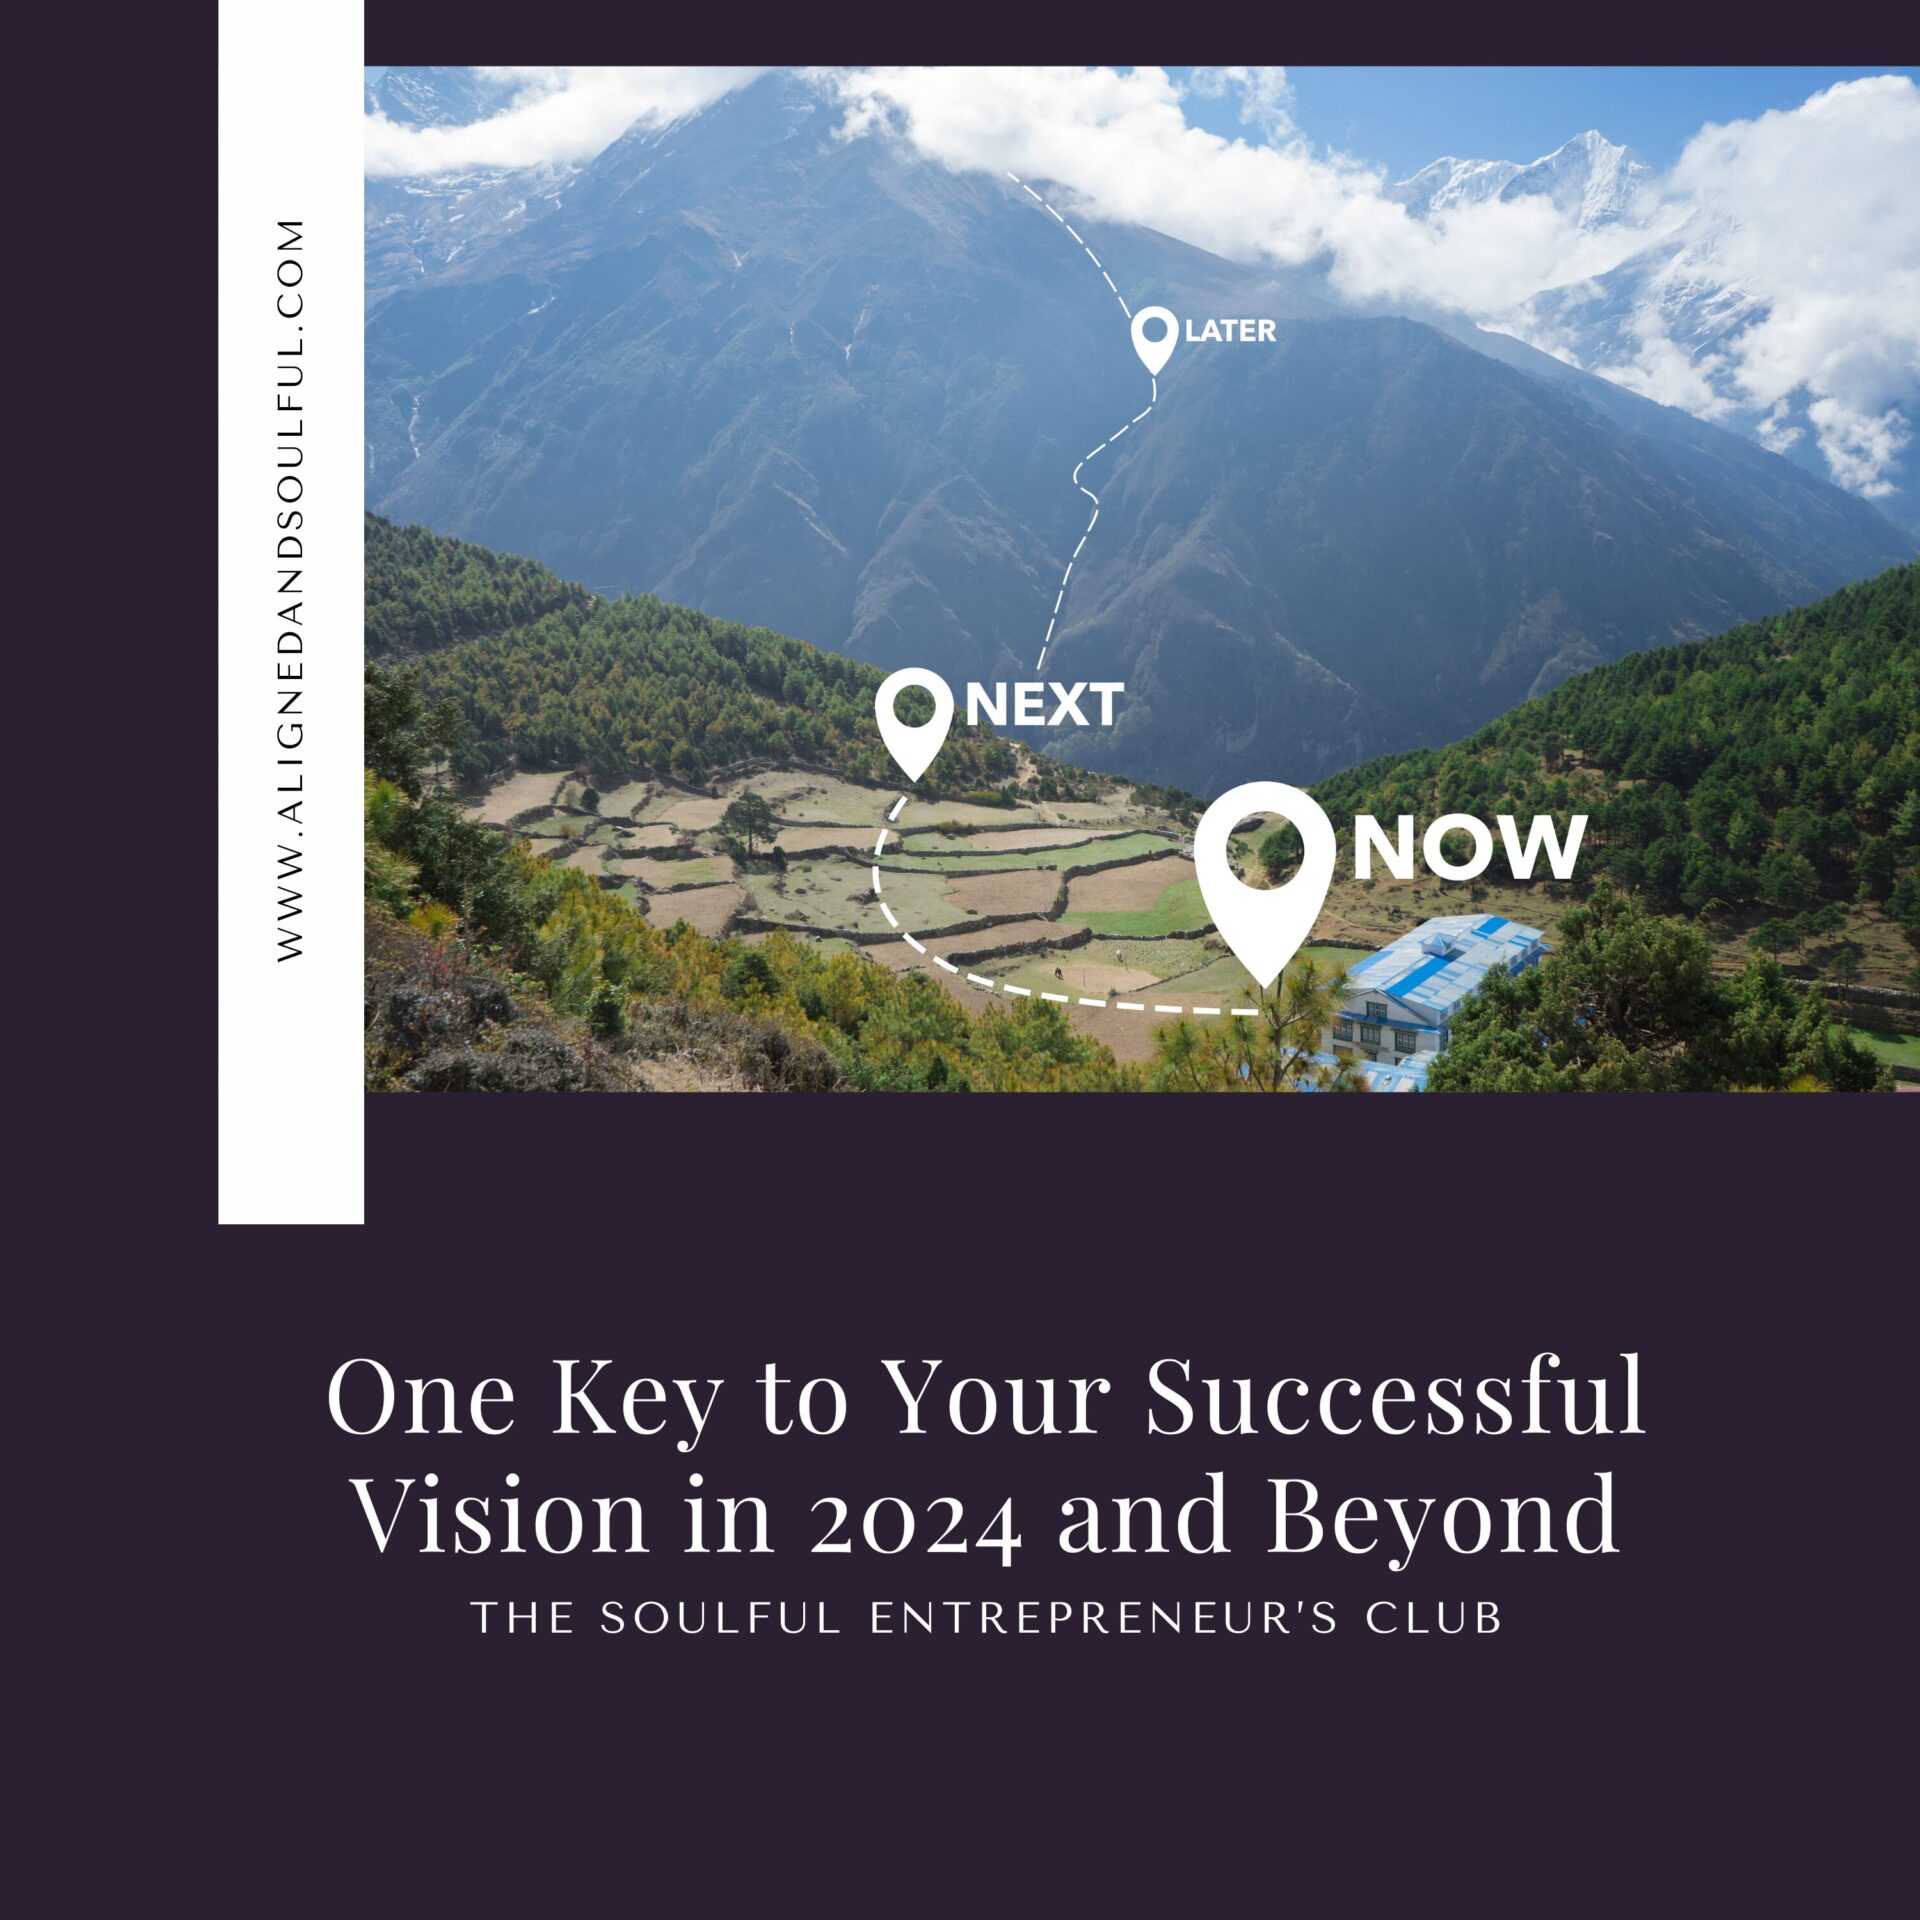 One Key to Your Successful Vision in 2024 and Beyond